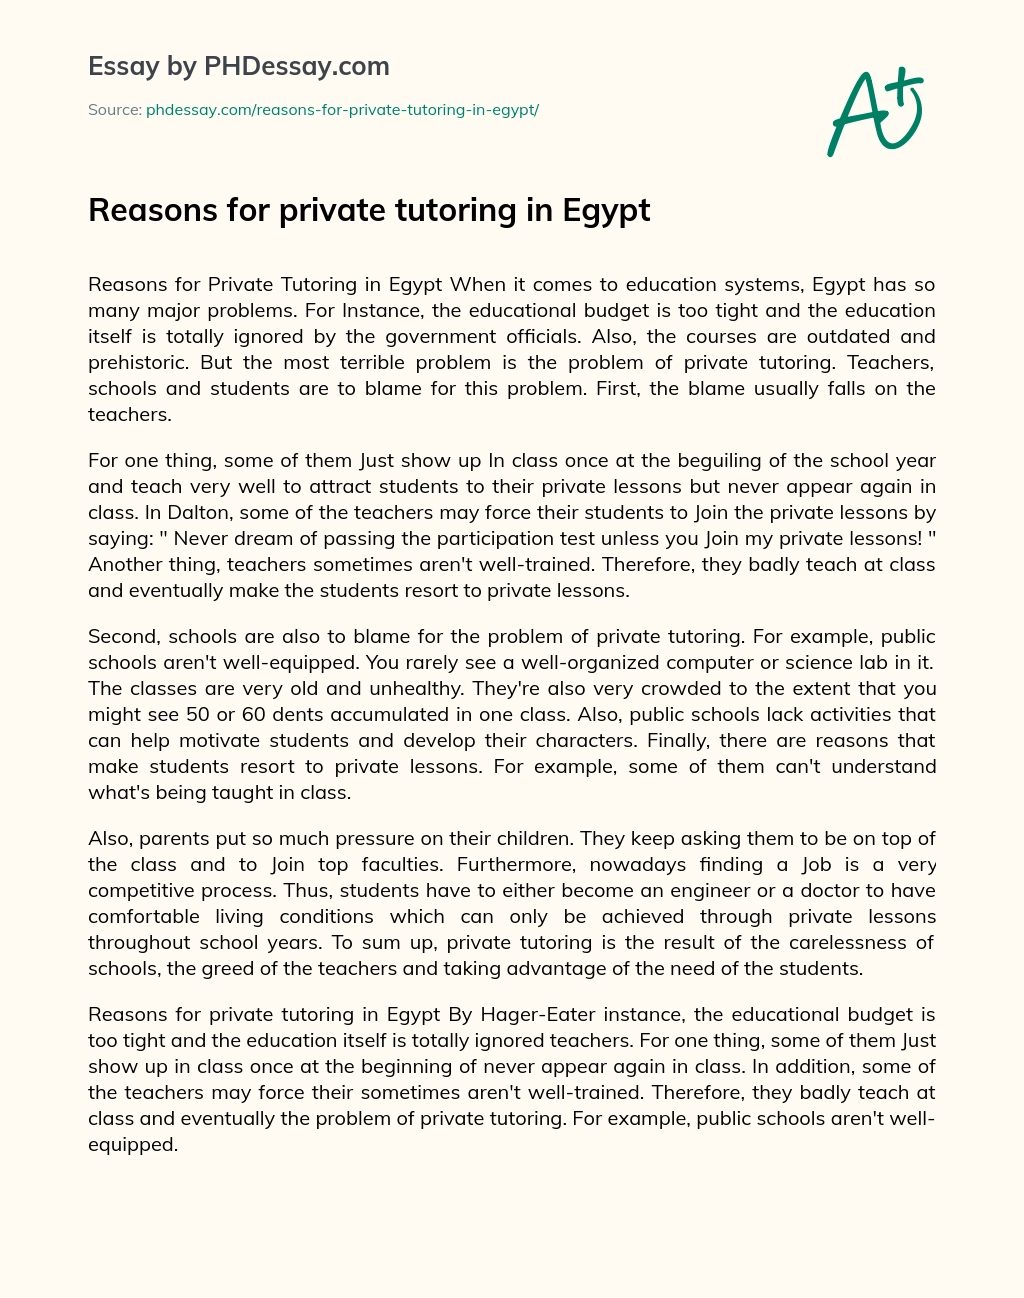 Reasons for private tutoring in Egypt essay